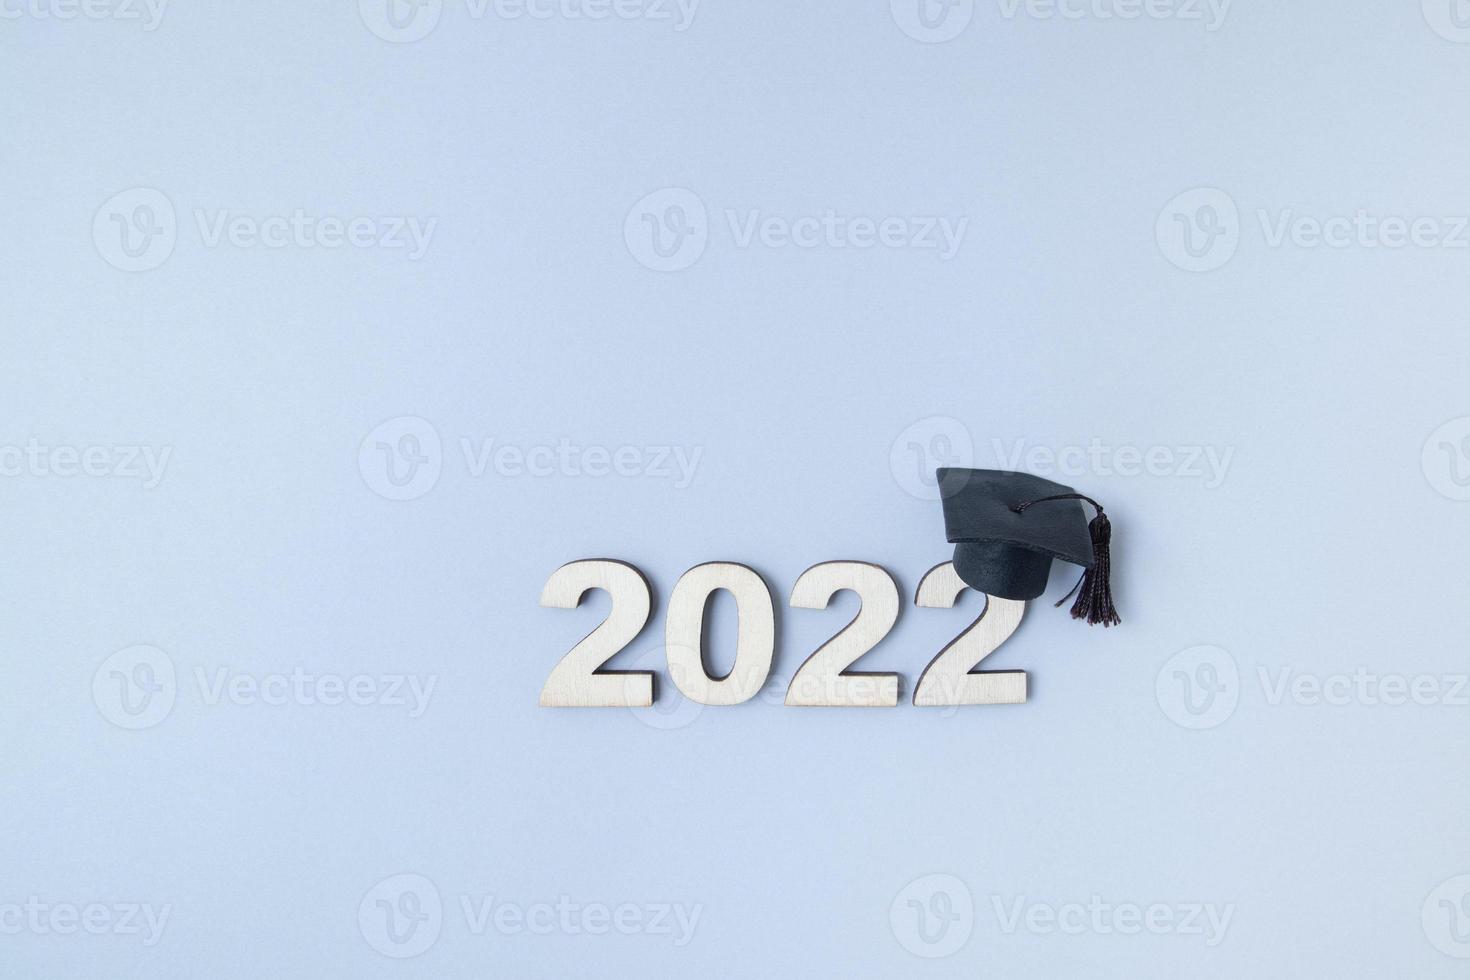 Graduation 2022 wearing graduate hat on wooden number 2022 on grey background with copy space photo